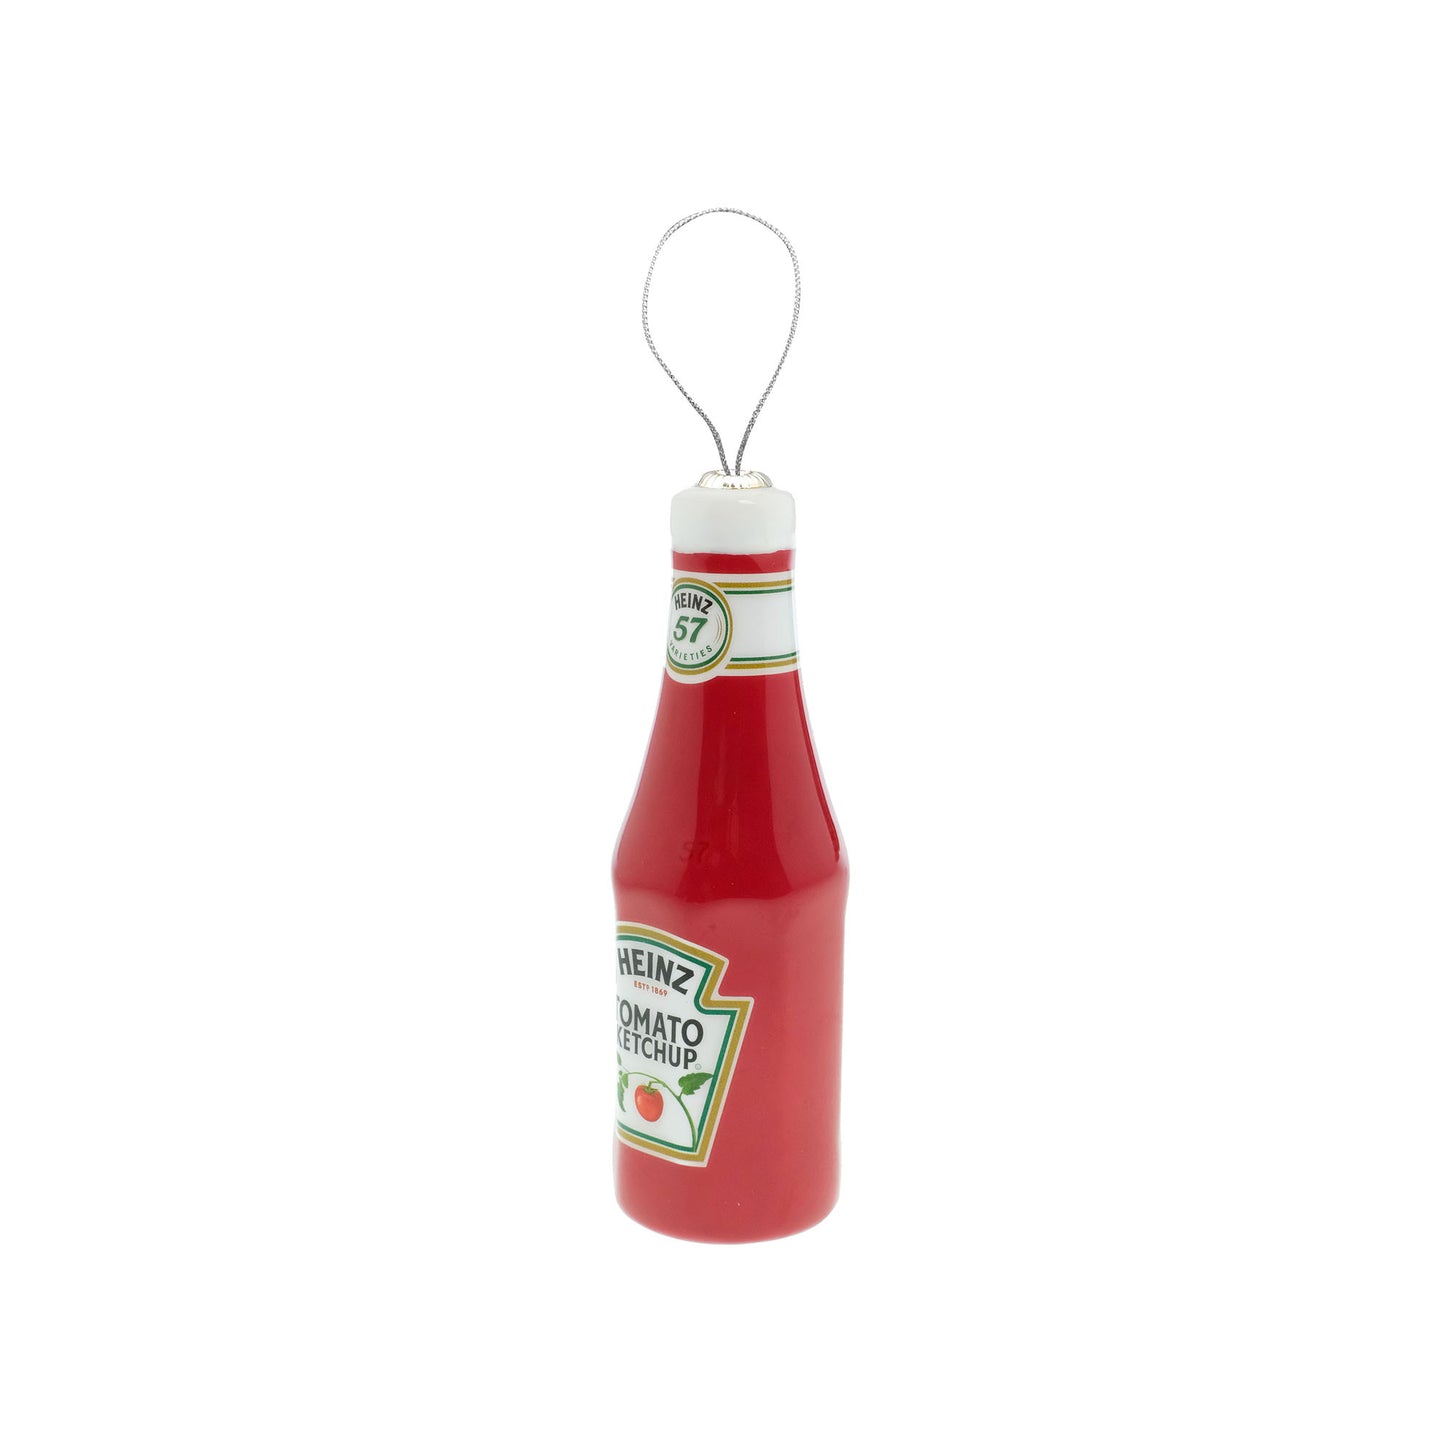 
                  
                    Heinz, Spam, and Hidden Valley Ranch Ornaments 3 pack
                  
                